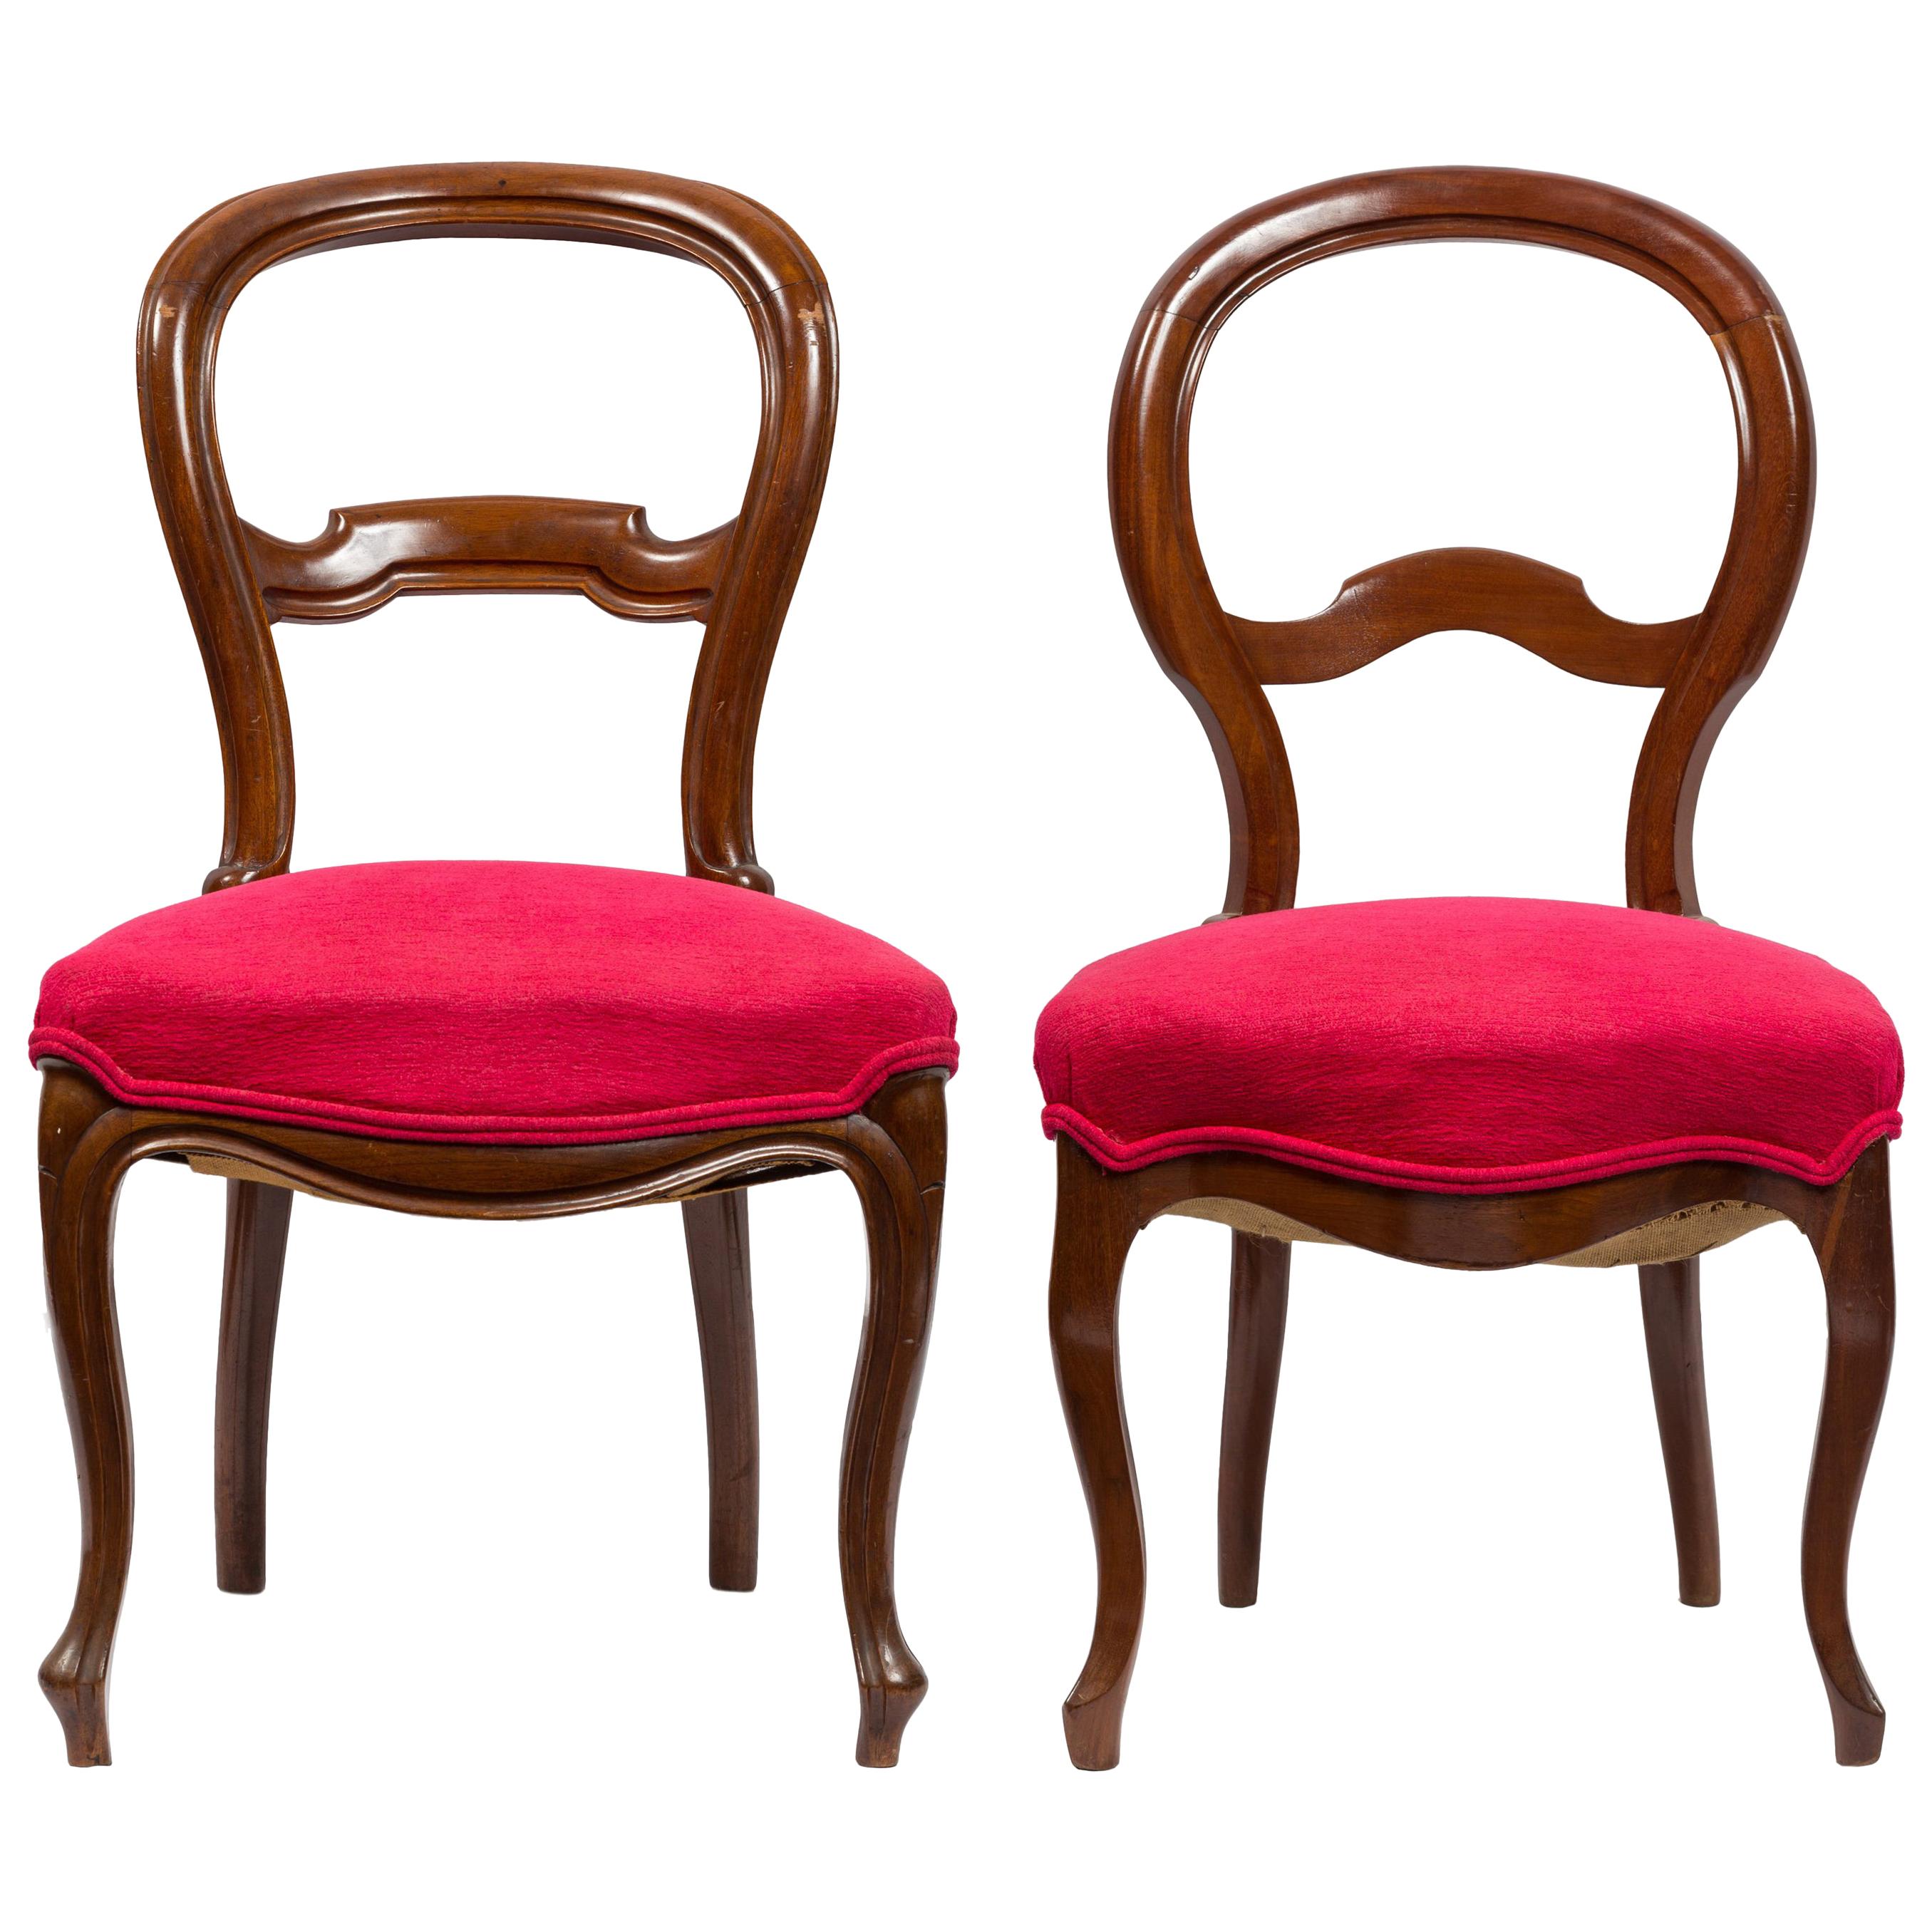 Pair of Unmatched 19th Century Walnut and Magenta Red Fabric Spanish Chairs